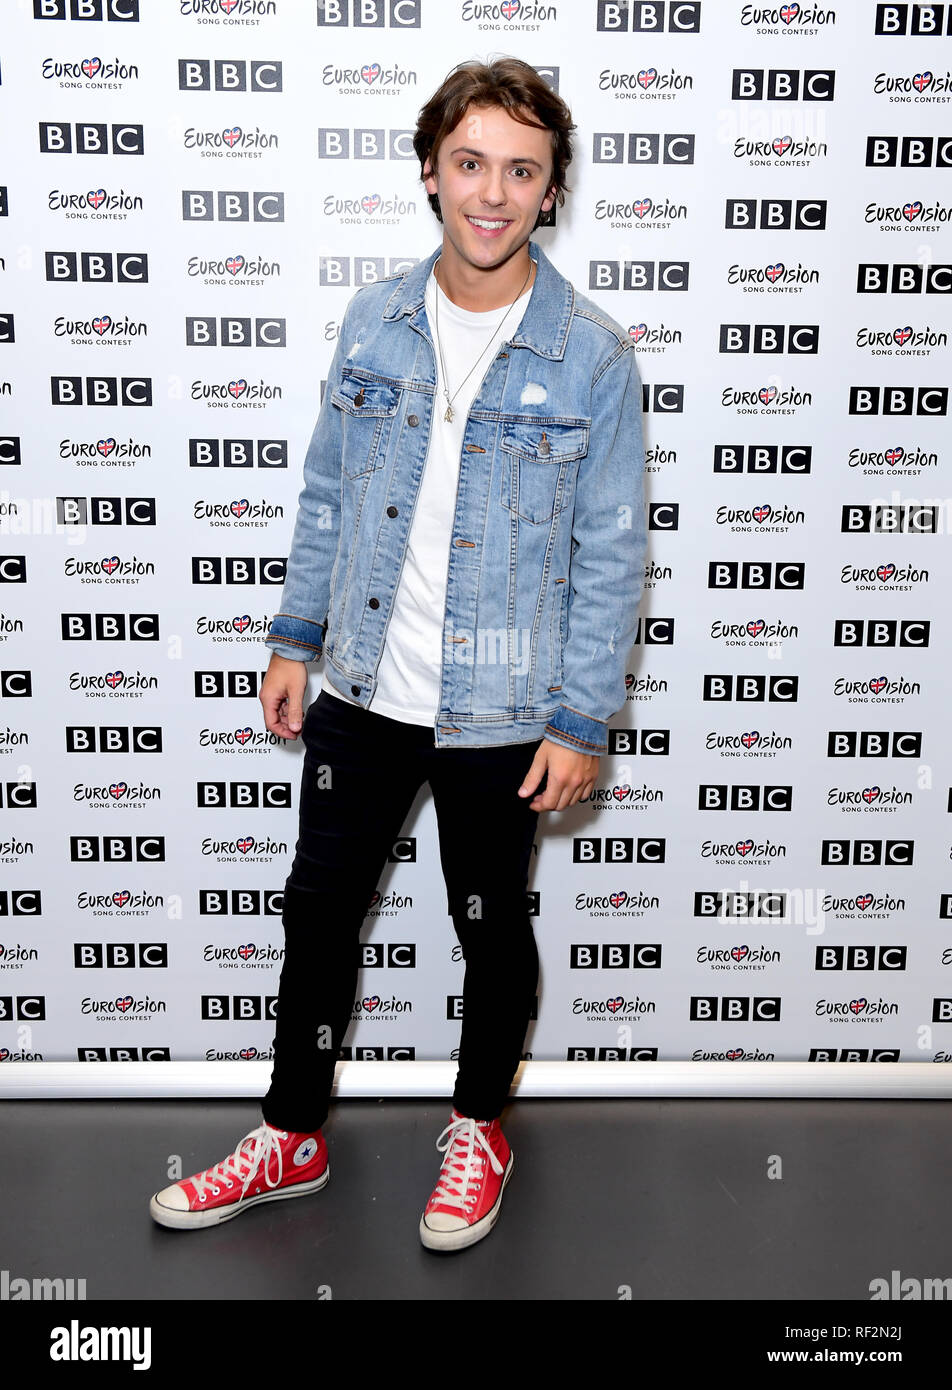 Jordan Clarke attending the Meet the Artists event held at BBC New Broadcasting House,